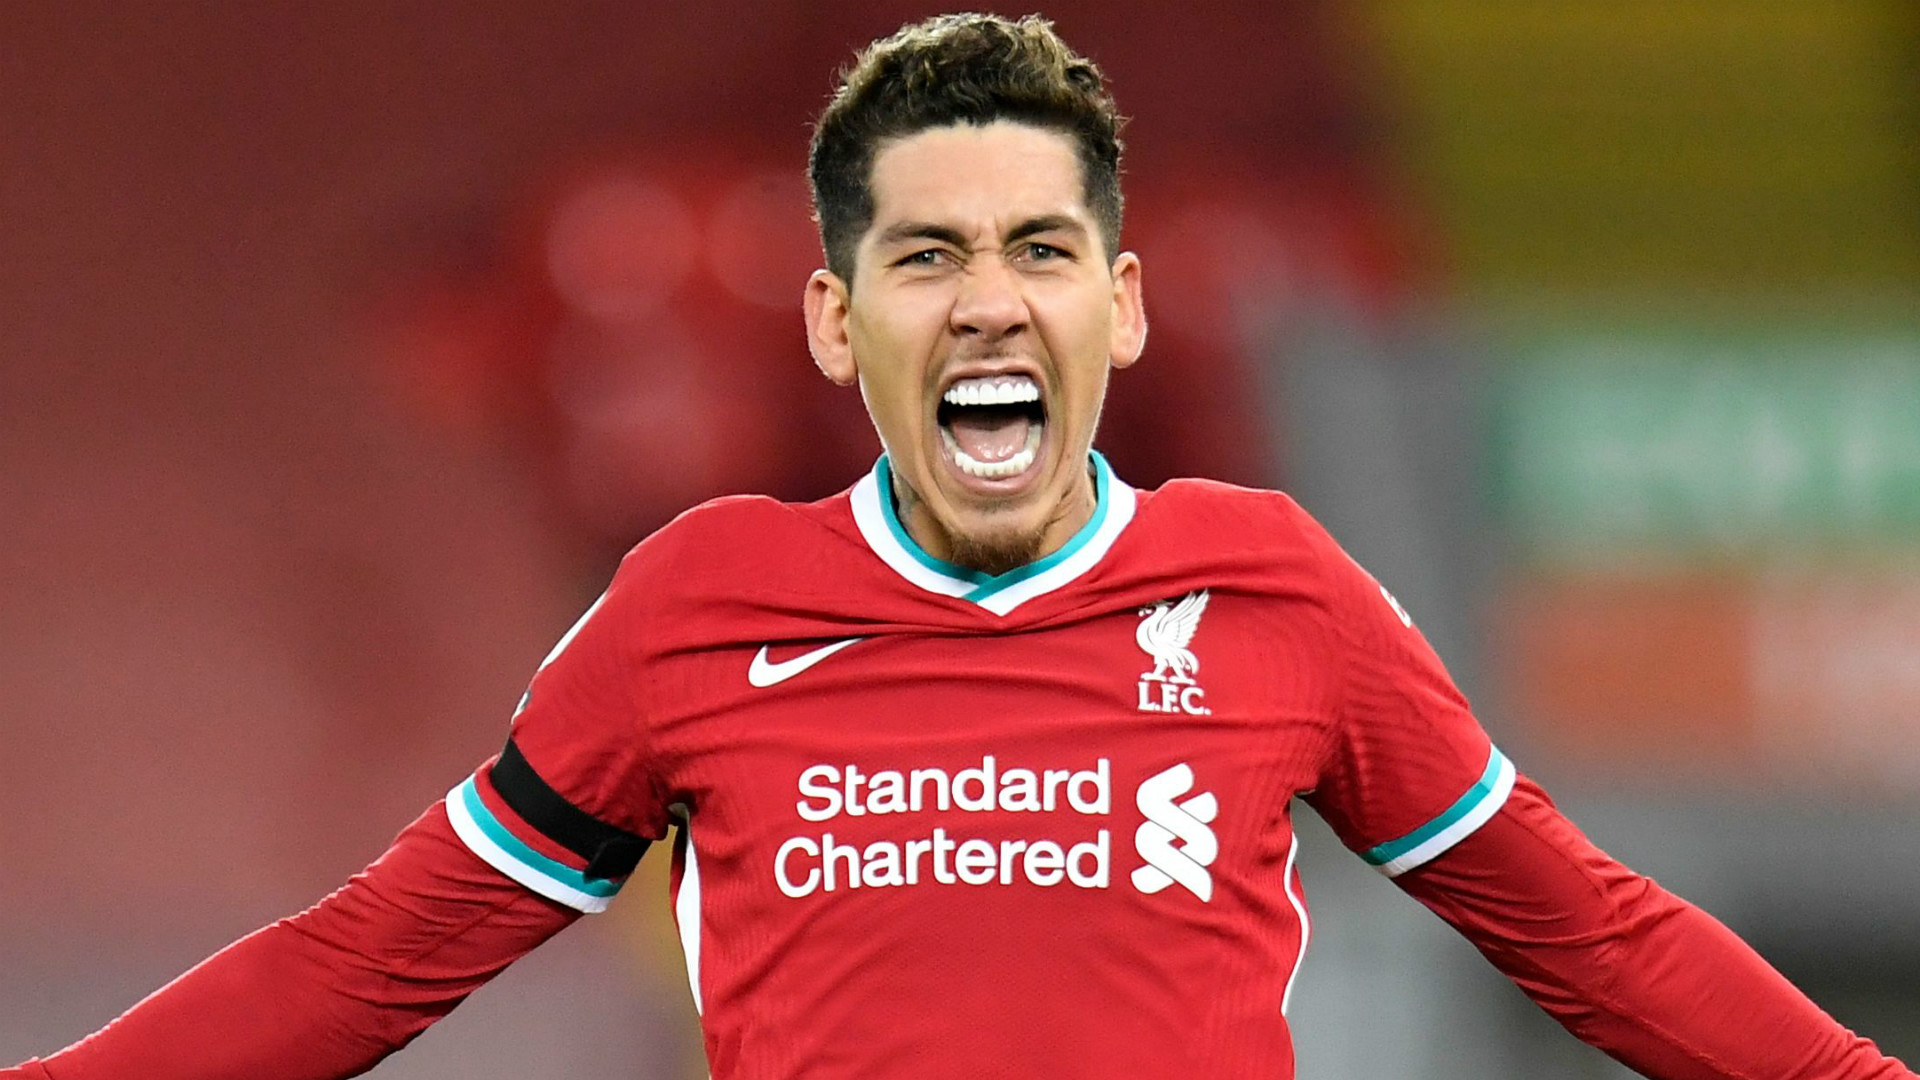 'People were putting Firmino out to pasture!' - McManaman delighted to see Liverpool star silence his critics